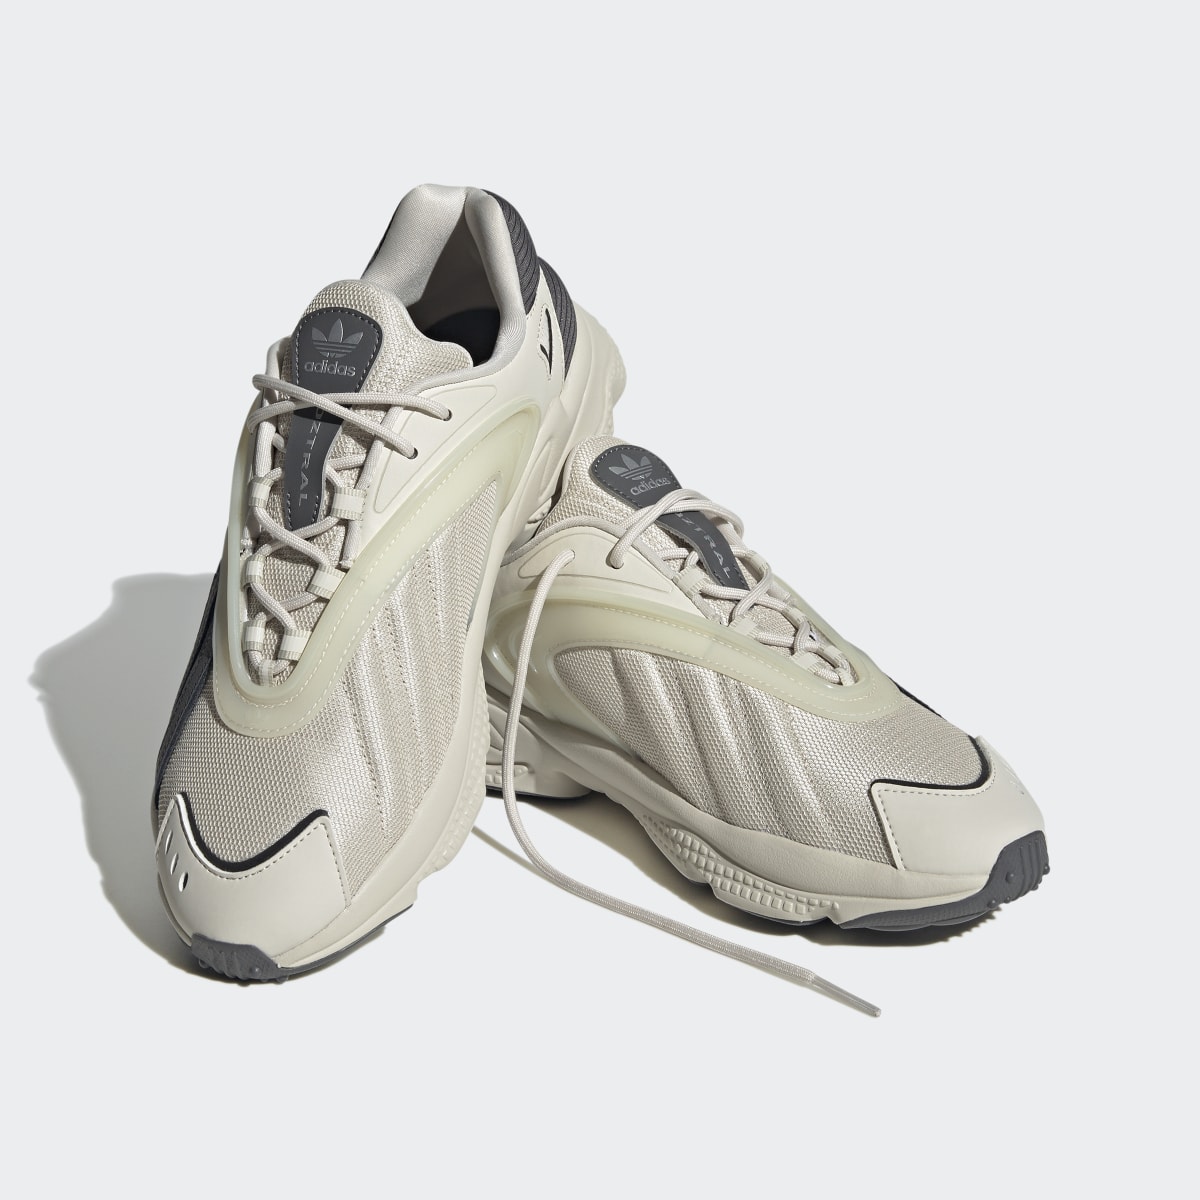 Adidas Chaussure Oztral. 11